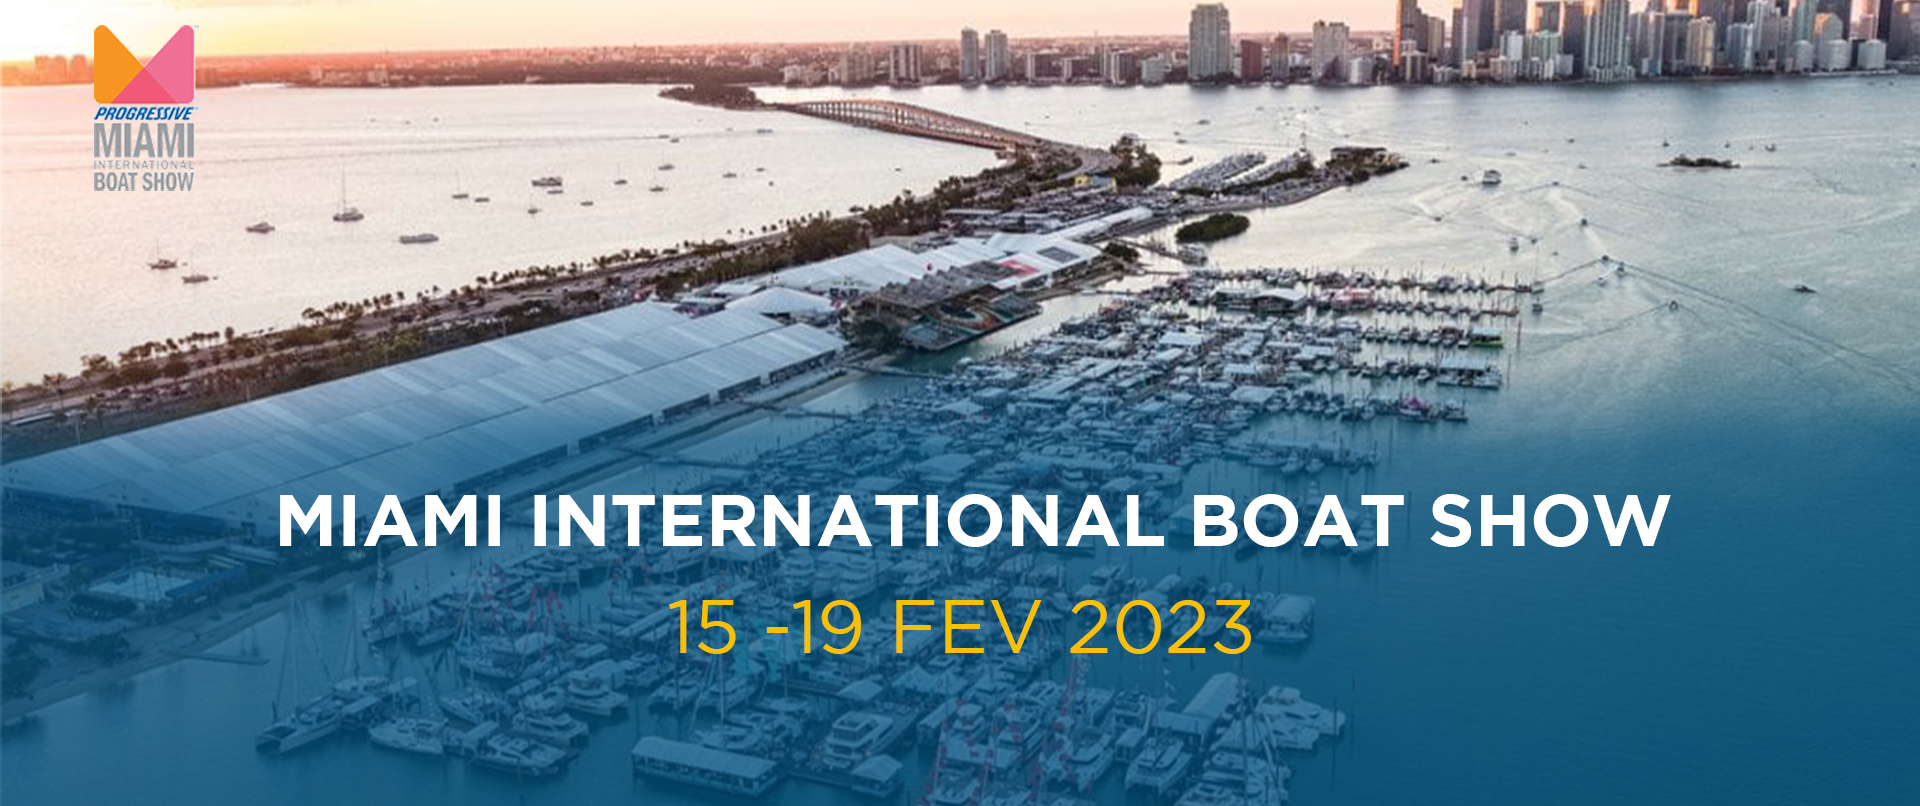 MIAMI BOAT SHOW 2023 Dufour Yachts